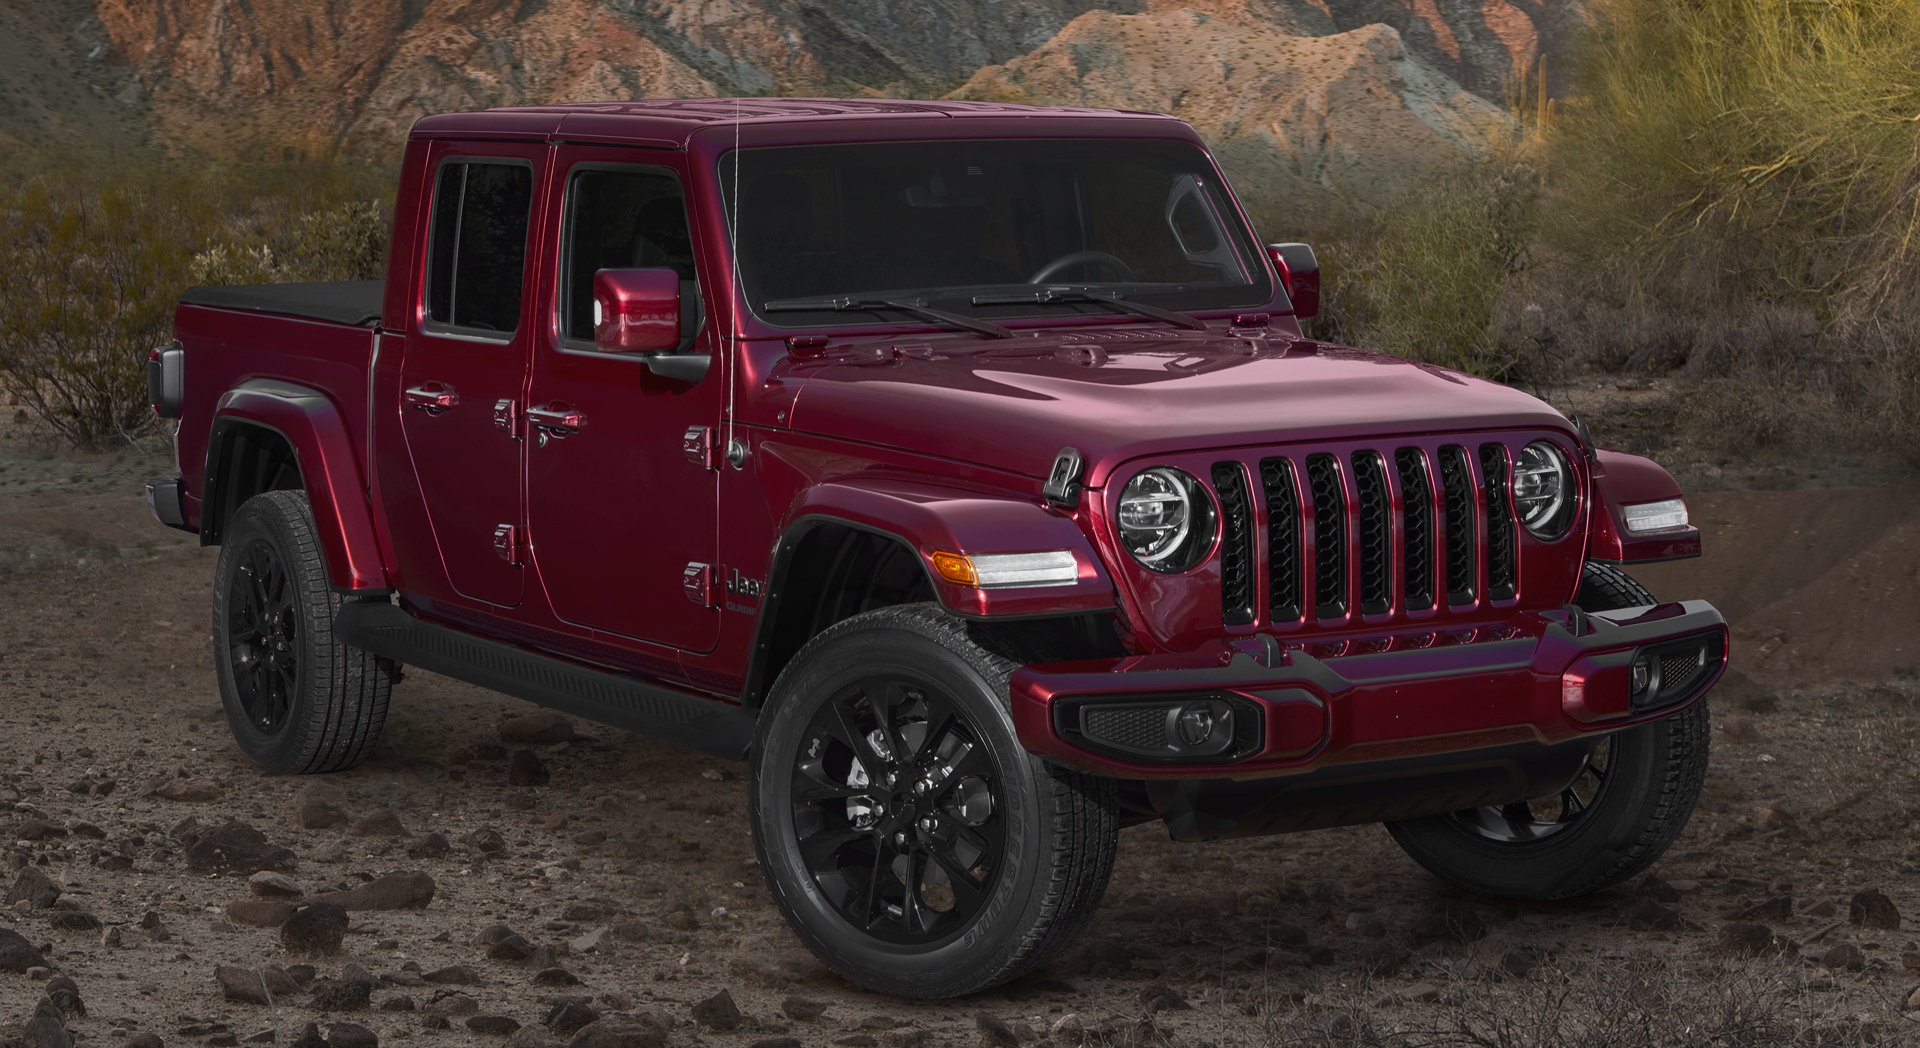 Jeep® Adds Snazzberry Exterior Color To 2021 Wrangler And Gladiator